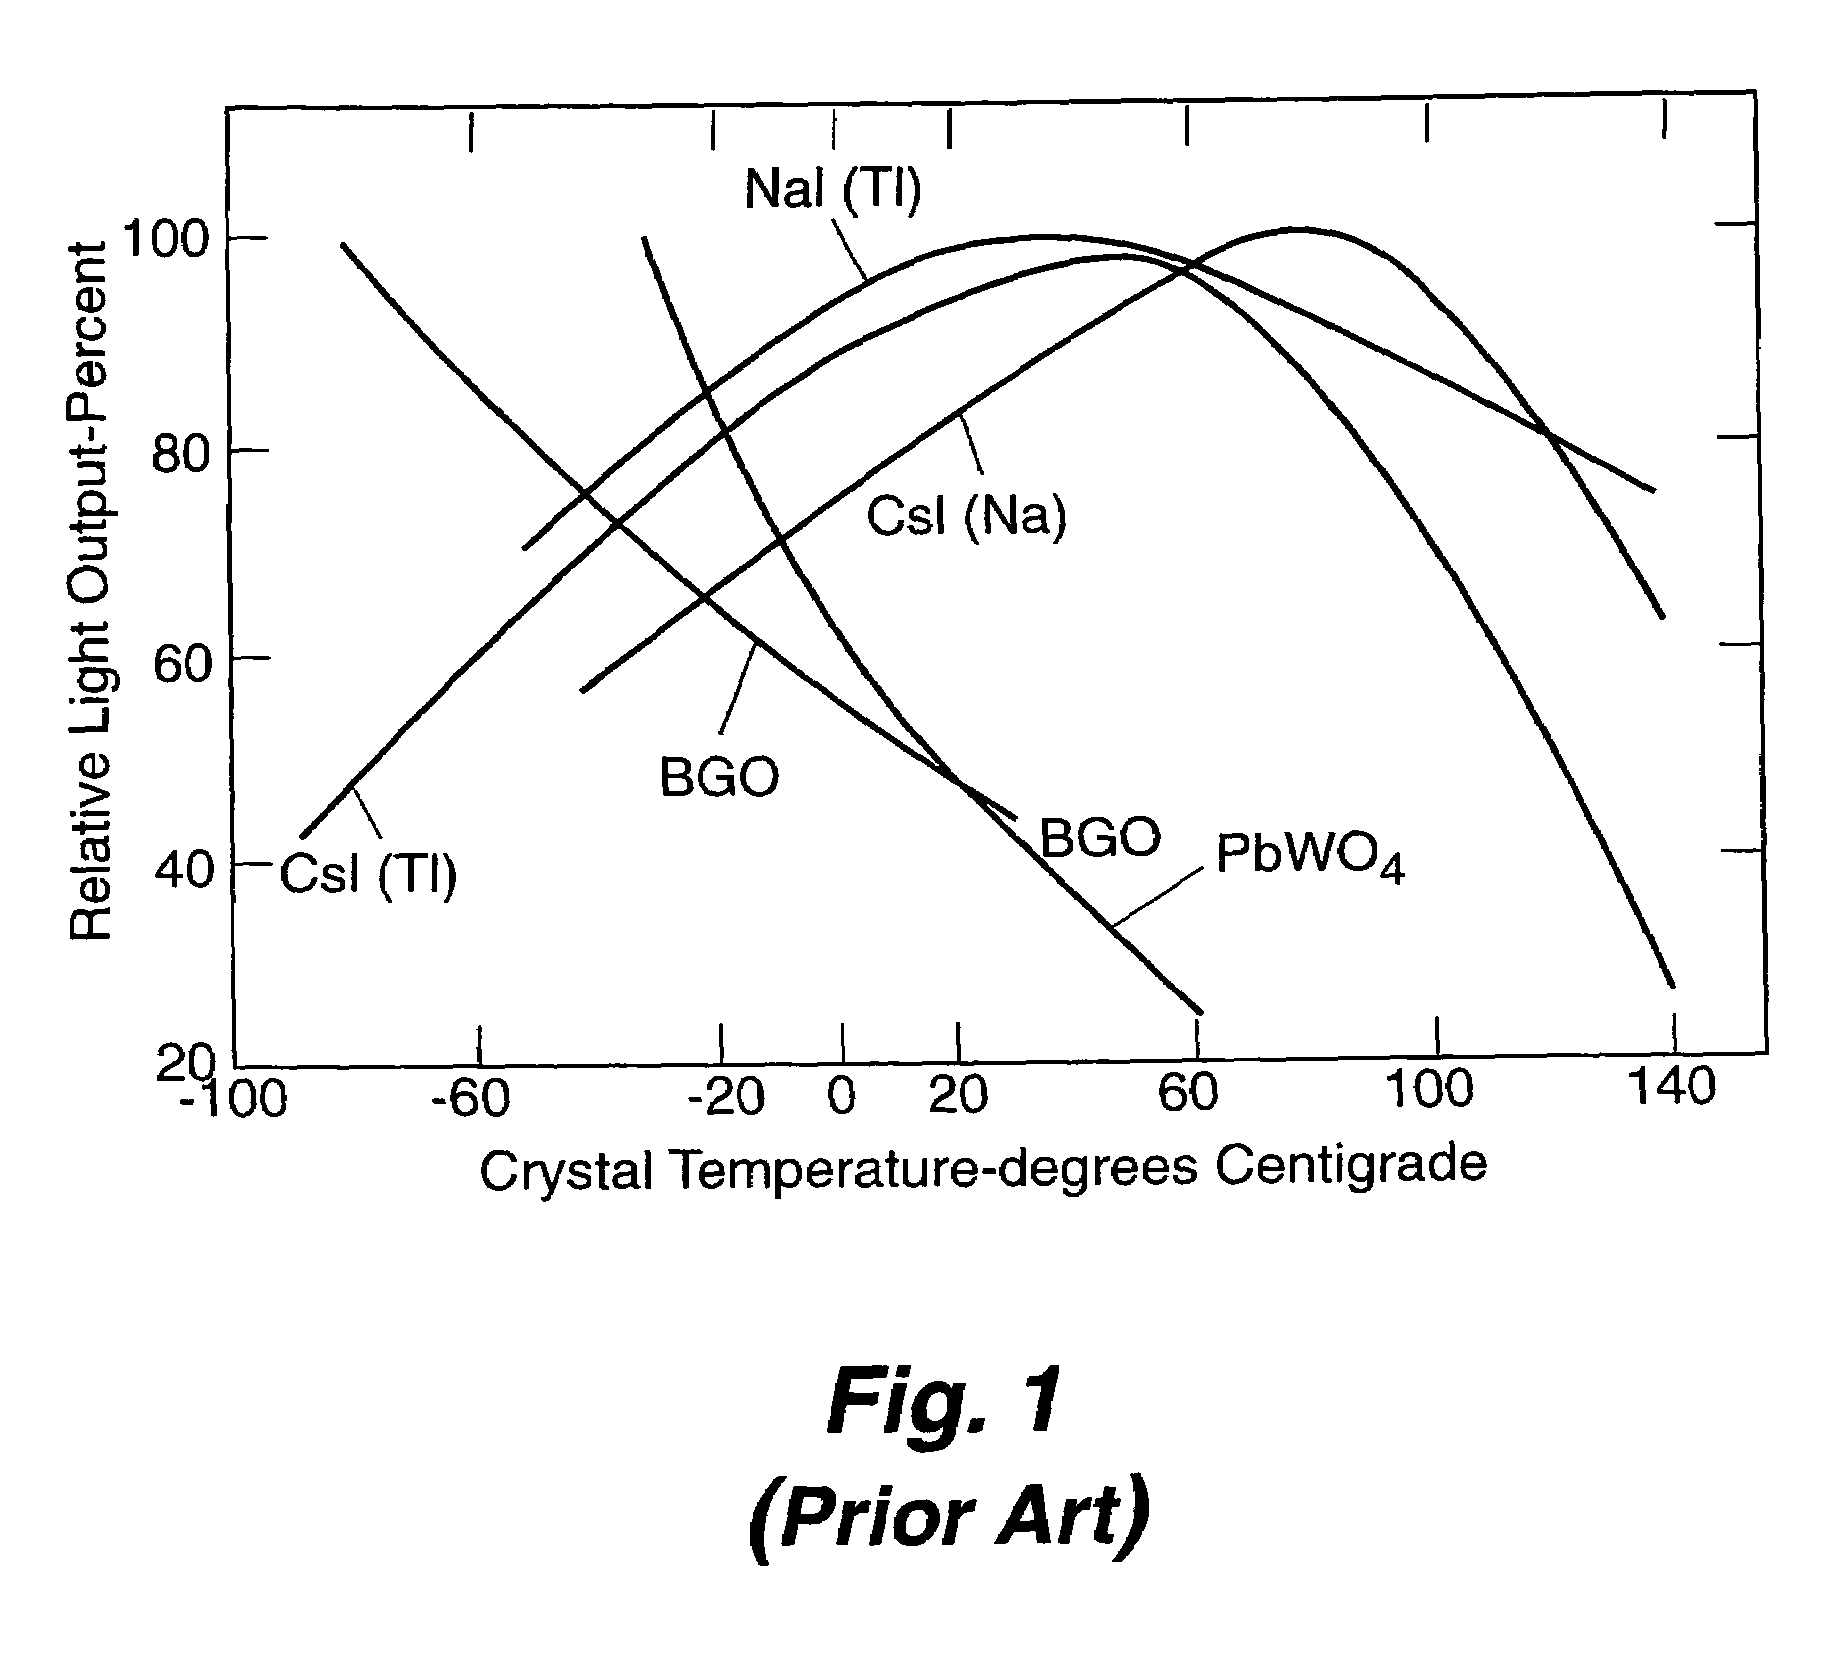 Apparatus and method for temperature correction and expanded count rate of inorganic scintillation detectors